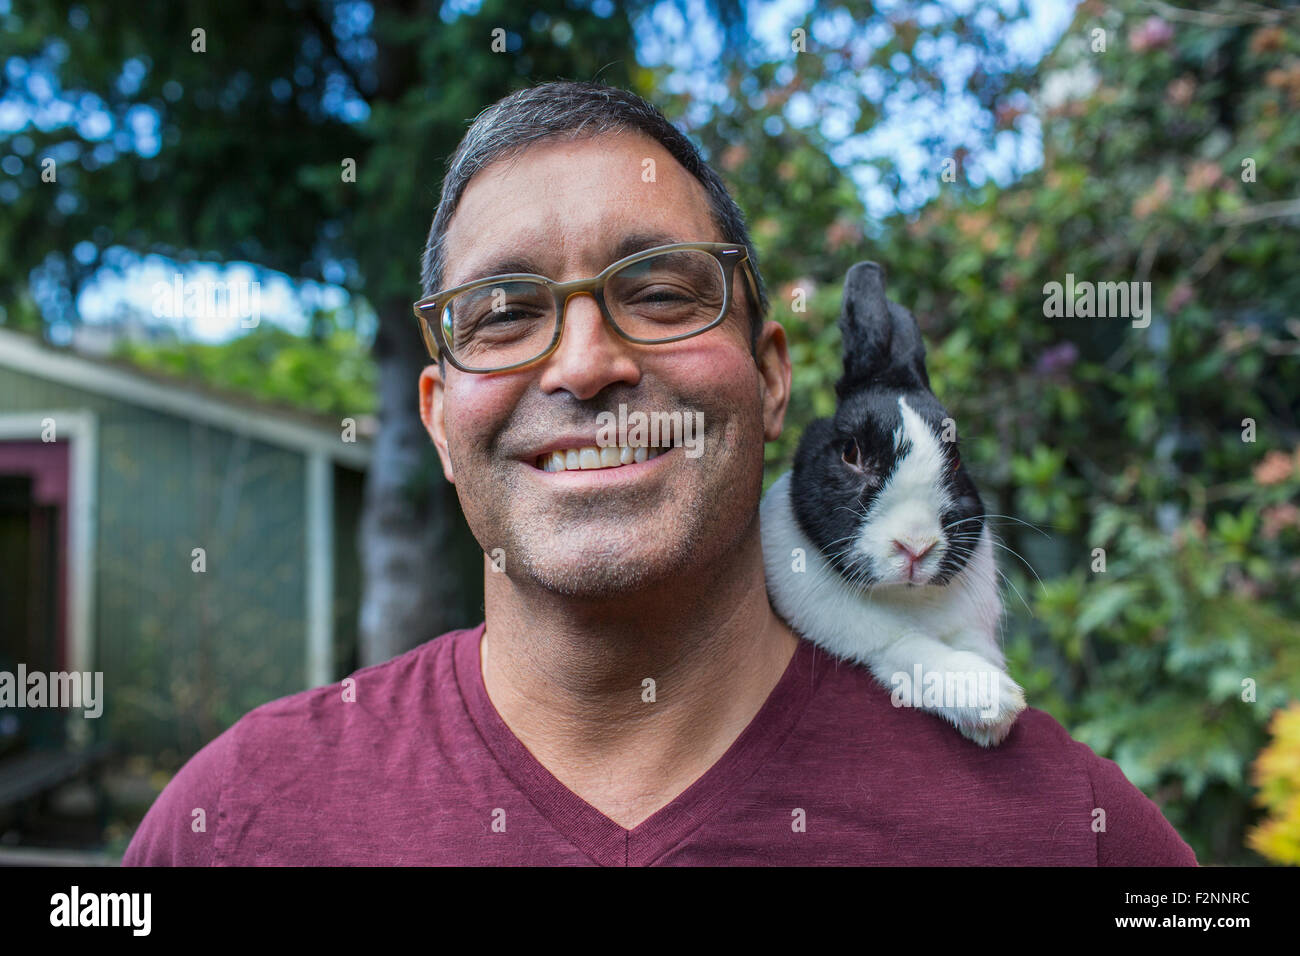 Mixed race man carrying rabbit on shoulder Stock Photo